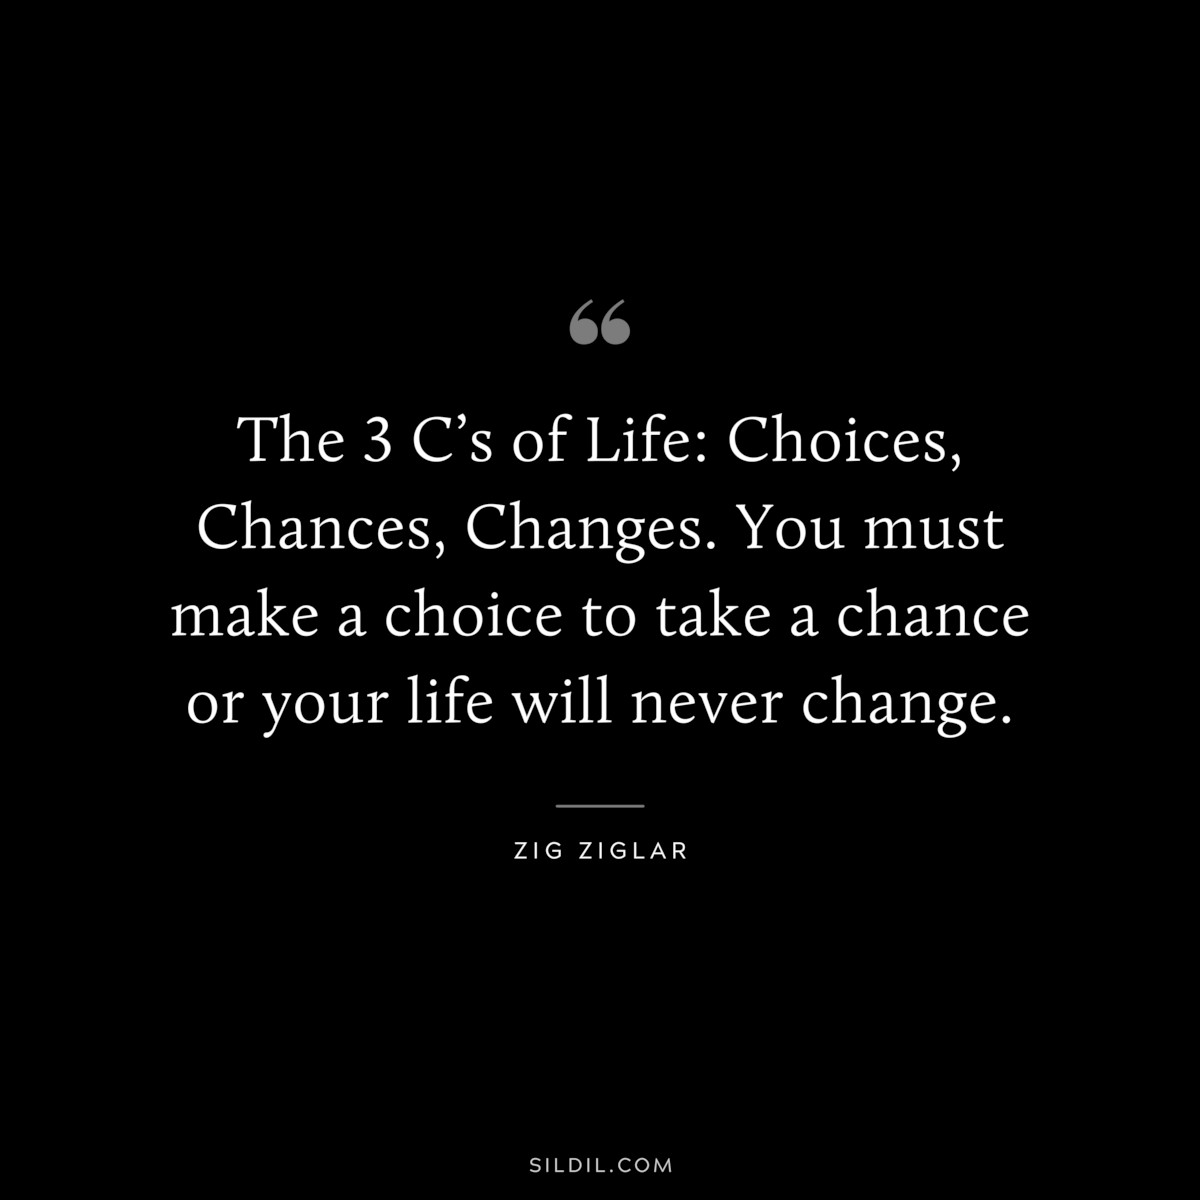 The 3 C’s of Life: Choices, Chances, Changes. You must make a choice to take a chance or your life will never change. ― Zig Ziglar